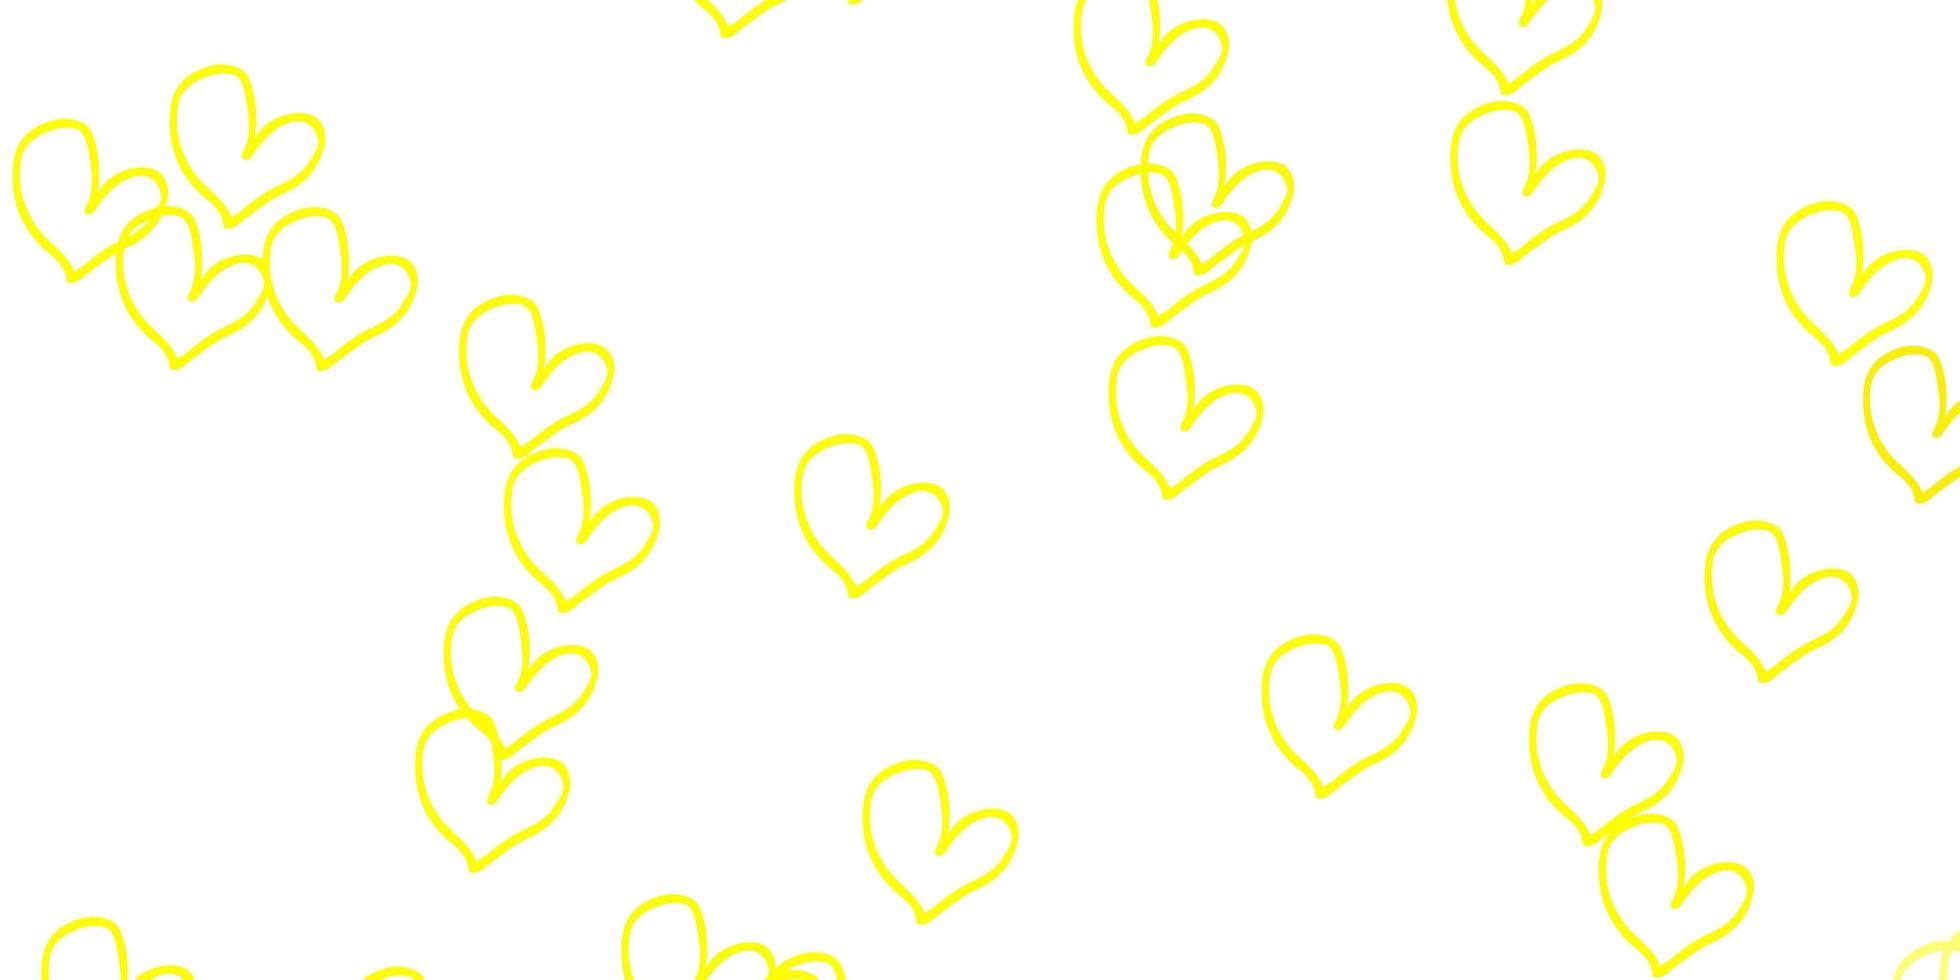 Light Yellow vector background with Shining hearts.